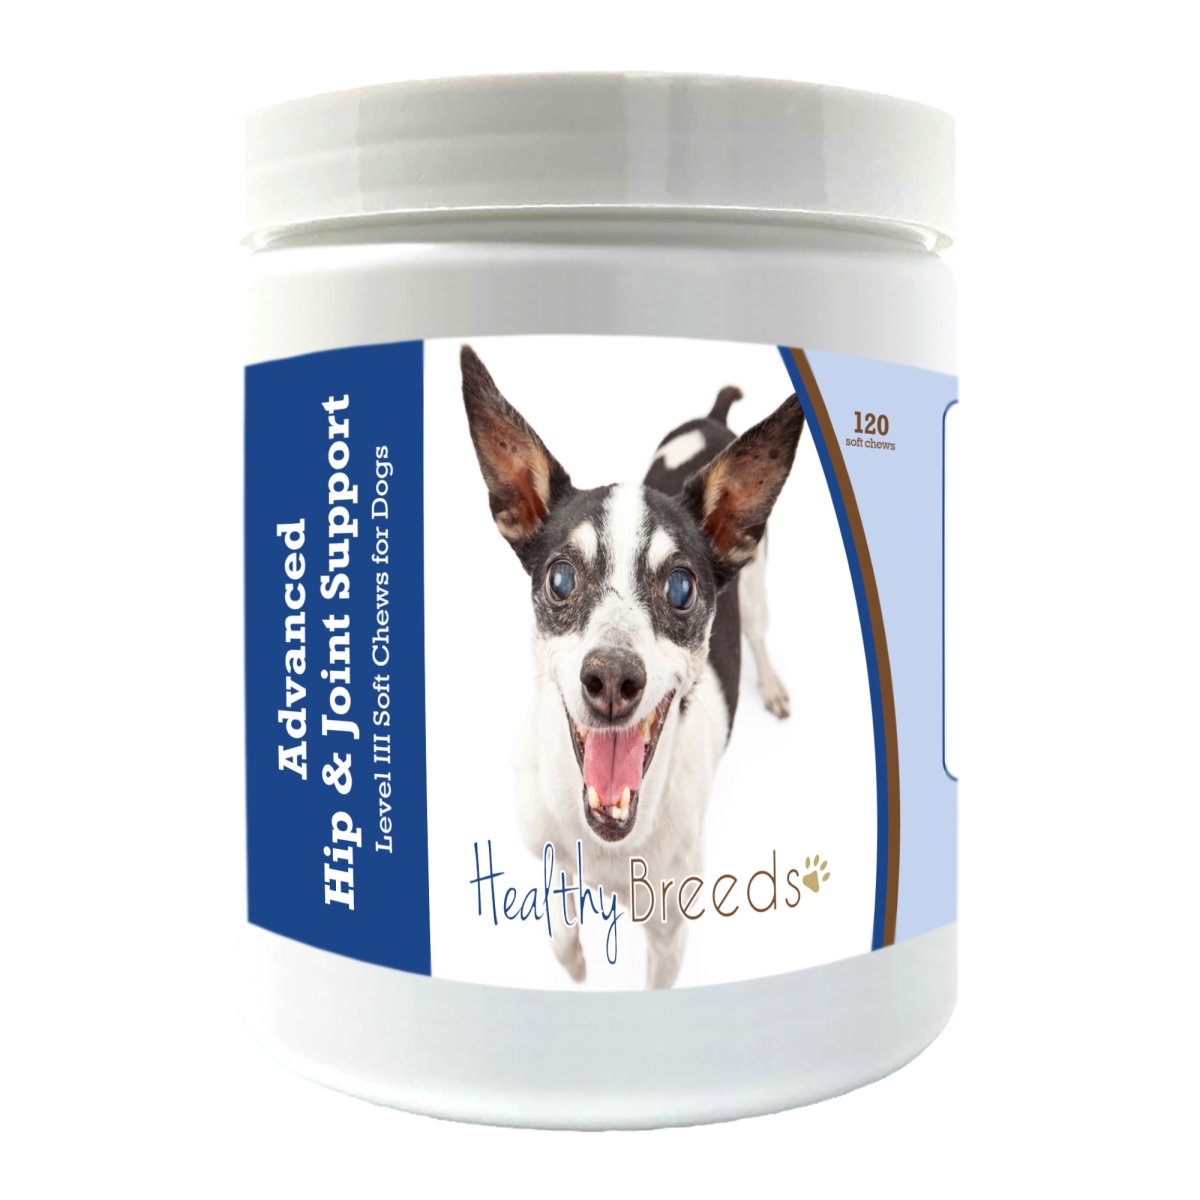 Picture of Healthy Breeds 192959899085 Rat Terrier Advanced Hip & Joint Support Level III Soft Chews for Dogs